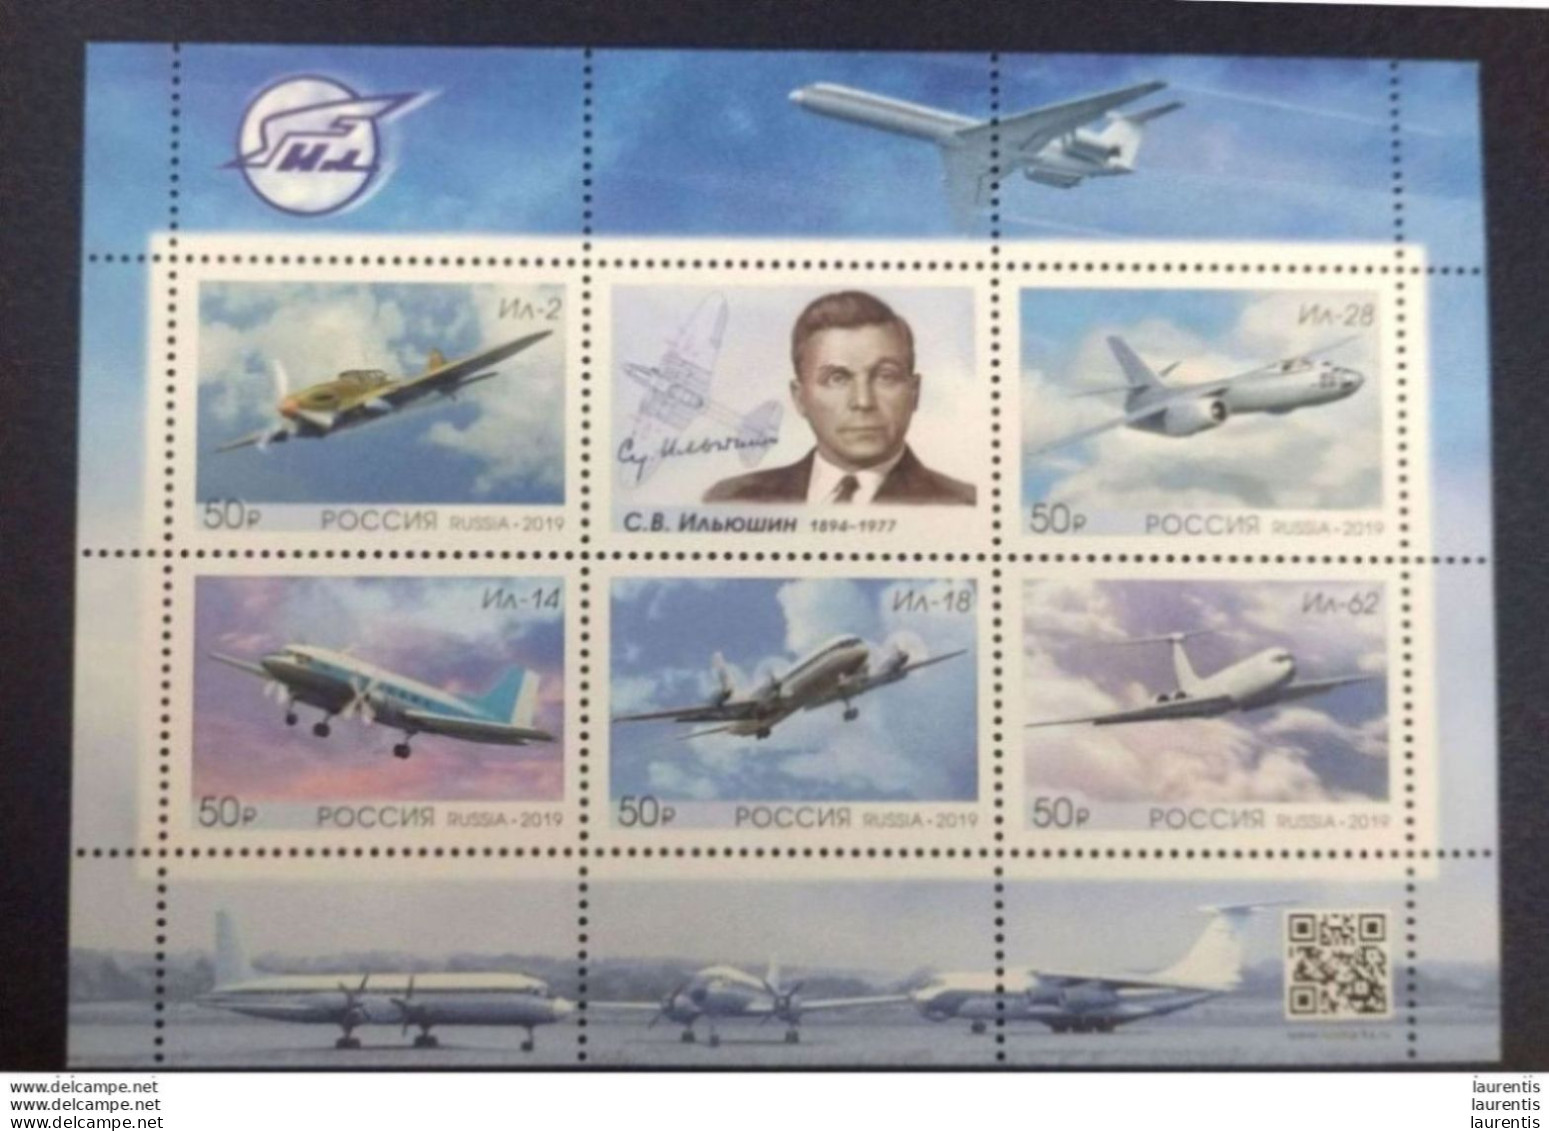 D630  Airplanes - Ilushin - Russia 2019 Sheetlet MNH - 2,85 - Airplanes